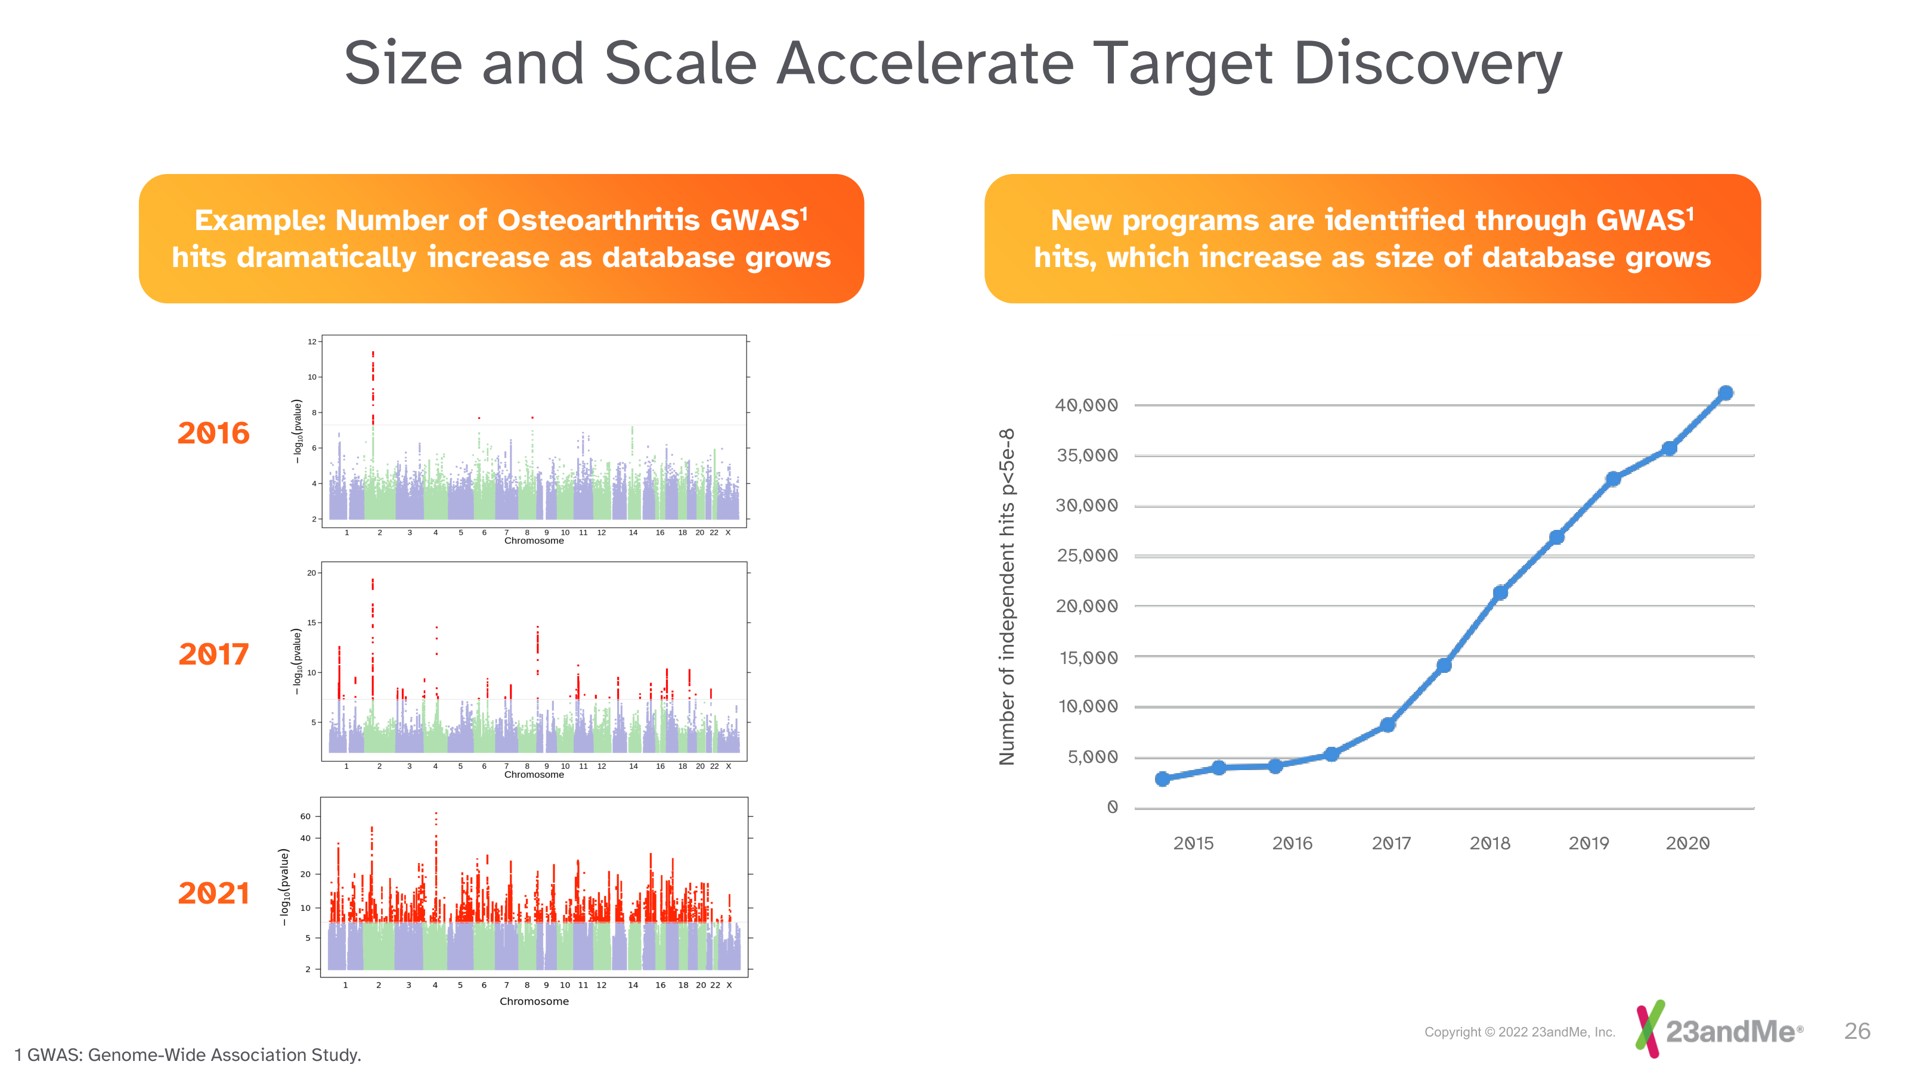 size and scale accelerate target discovery | 23andMe